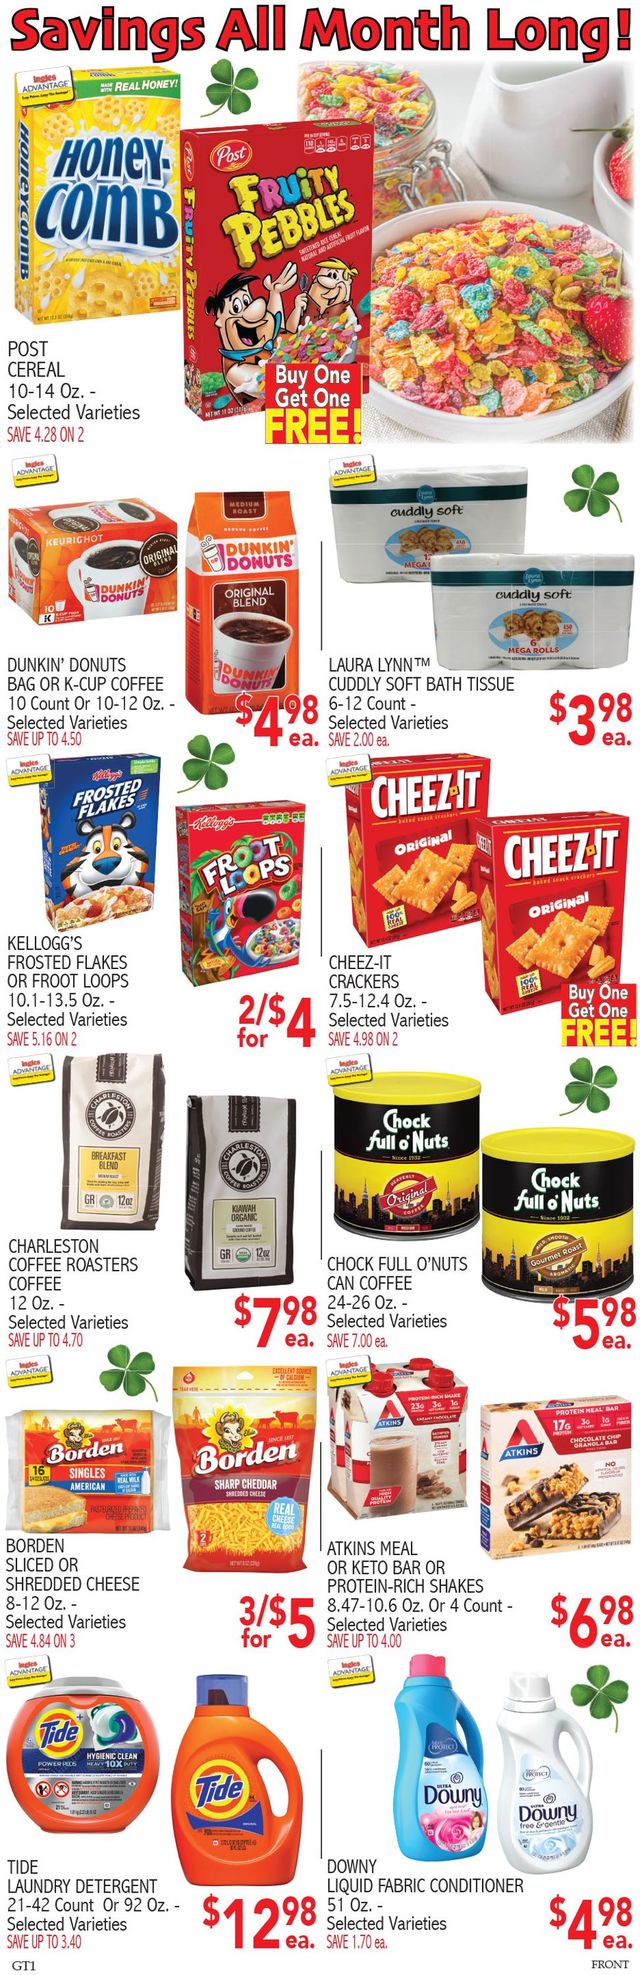 Ingles Ad from 03/16/2022